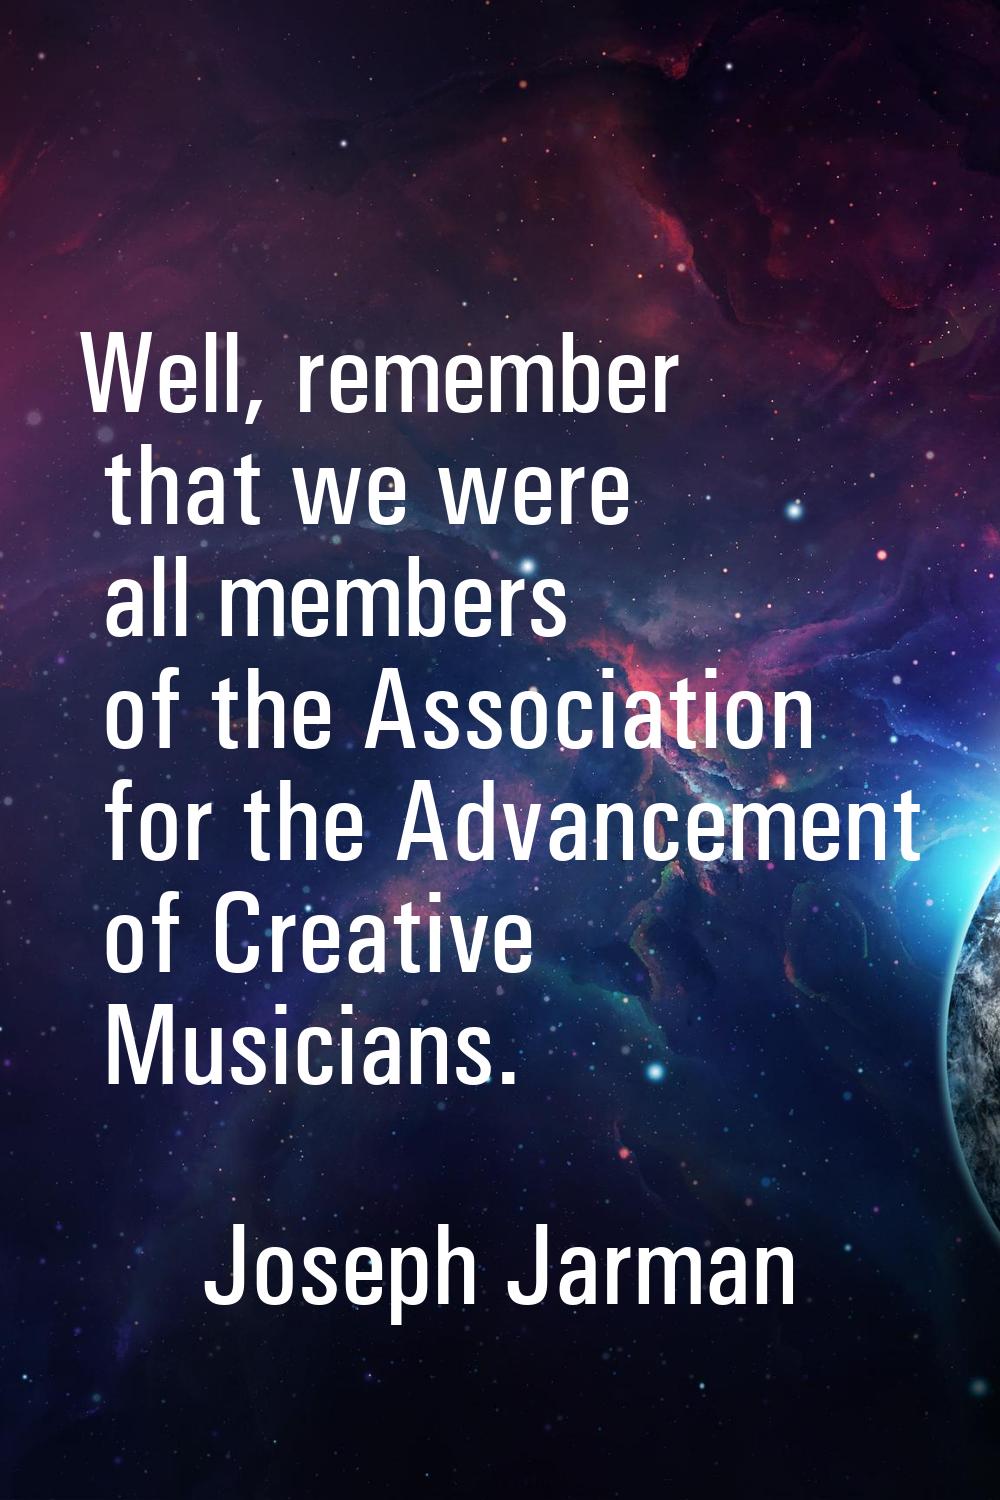 Well, remember that we were all members of the Association for the Advancement of Creative Musician